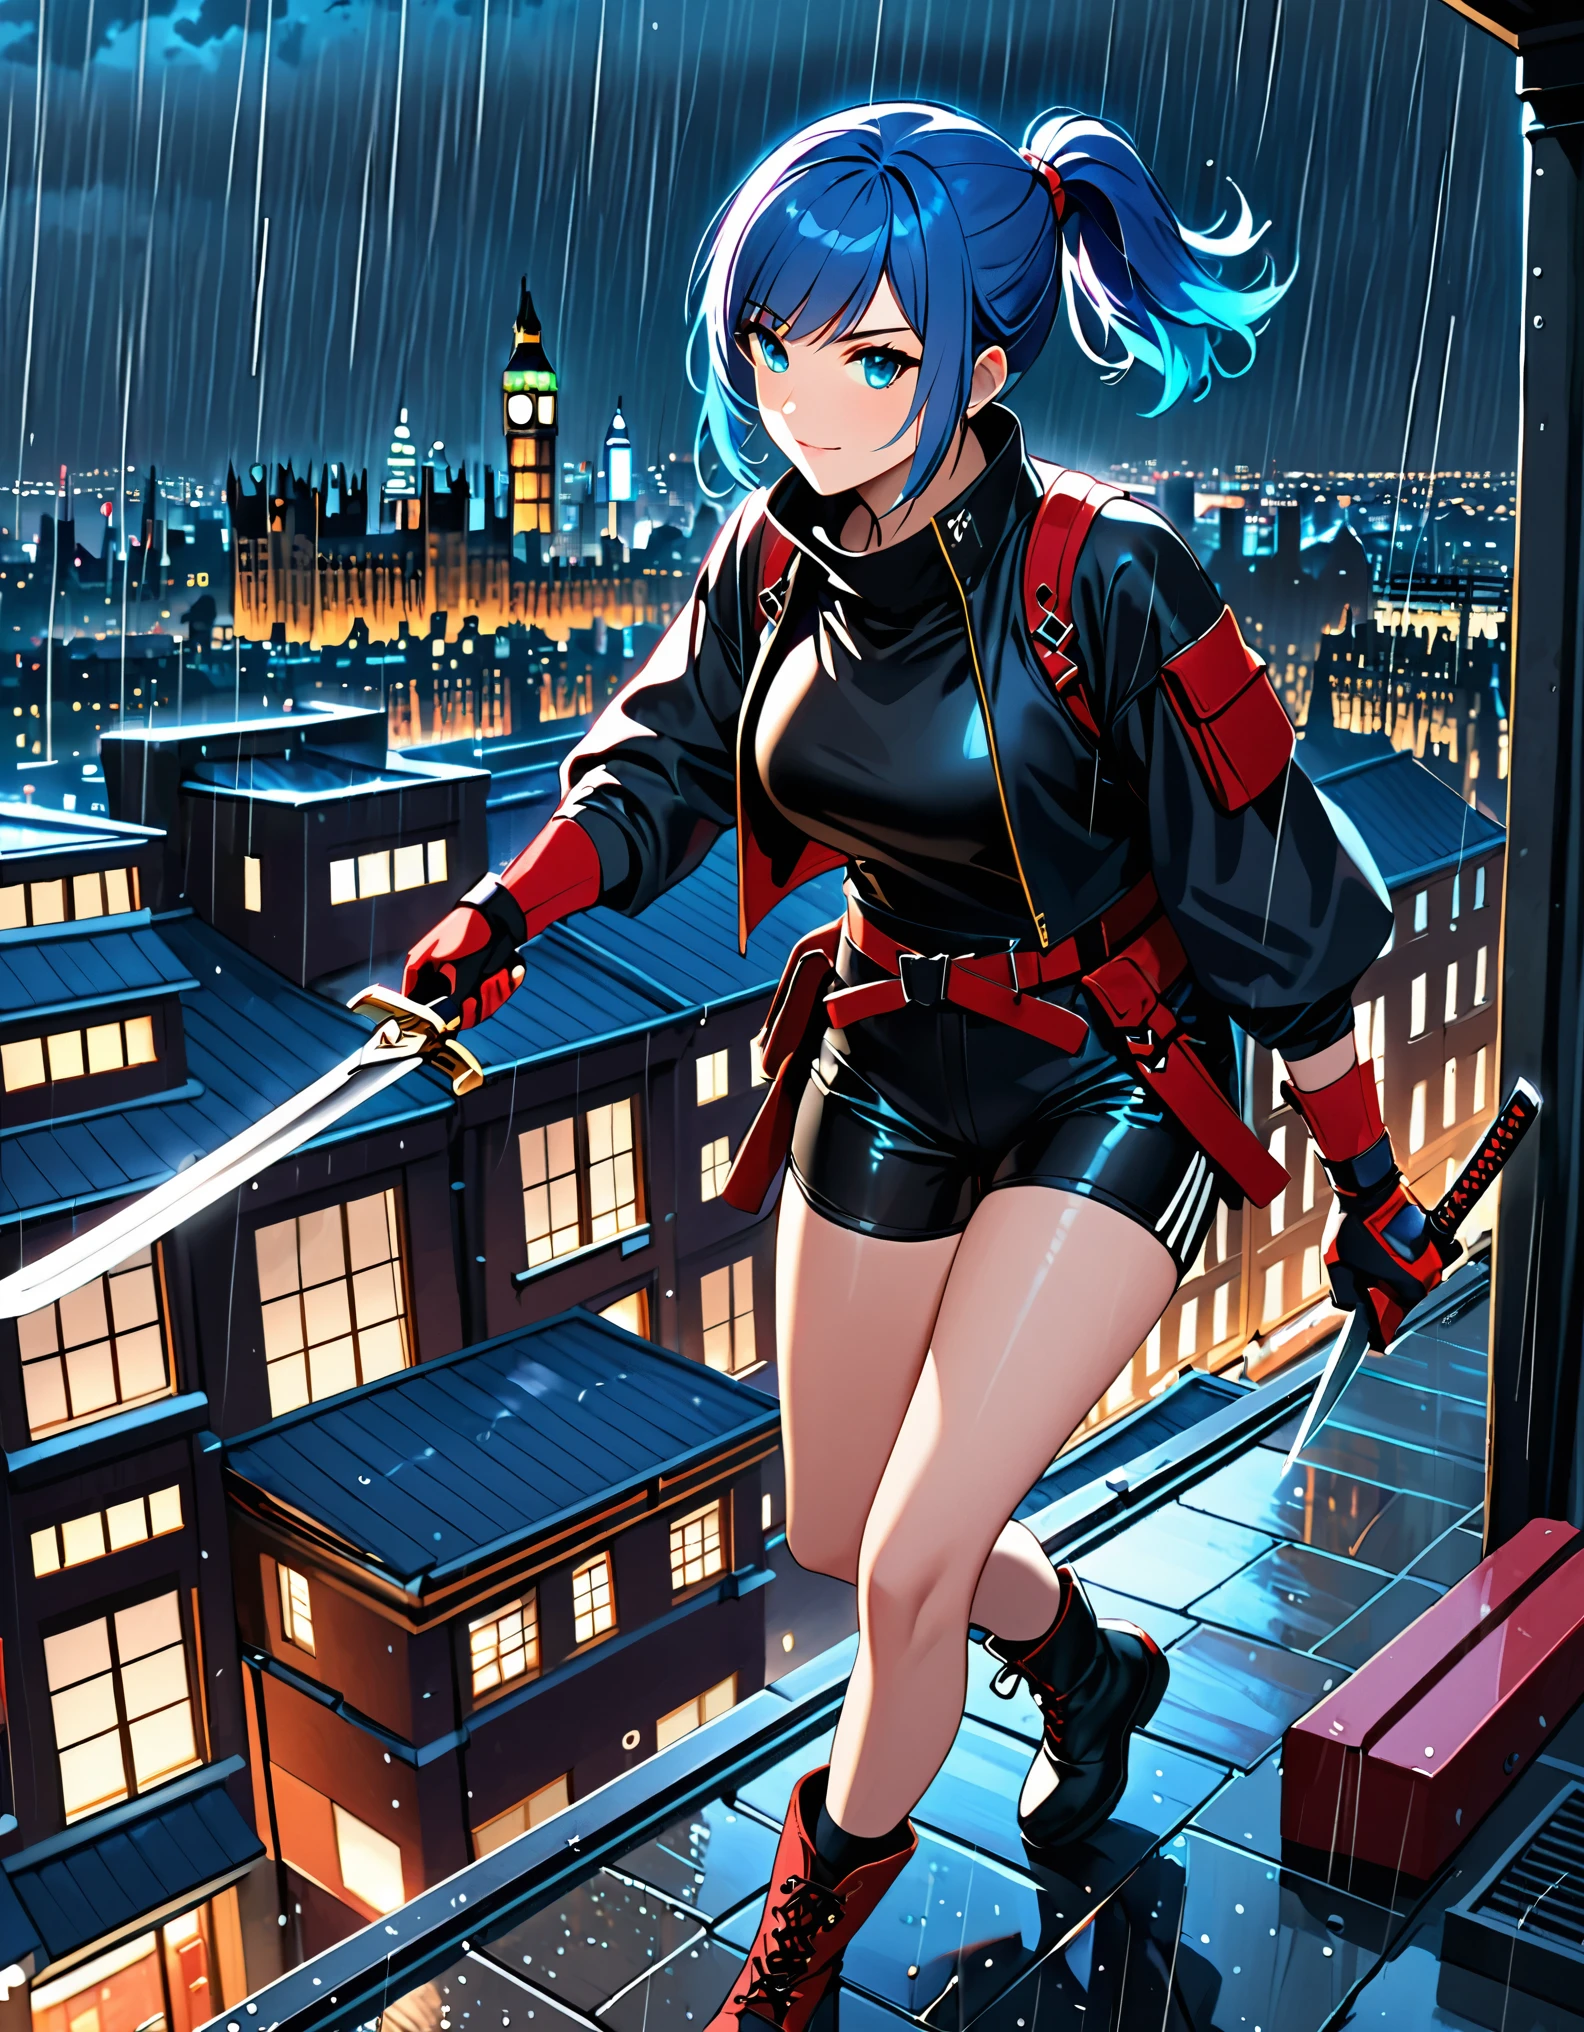 masterpiece, best quality, semi-realistic, solo, solo focus 1girl, blue hair, short hair, ponytail hair, cyan eyes, beautiful detailed eyes, beautiful detailed face, stoic, professional, ninja, black biker shorts, red tactical gloves, bare legs, matching boots, using daggers, london cityscape, rooftop, dutch angle, night, rain, running to viewer, noir atmosphere.